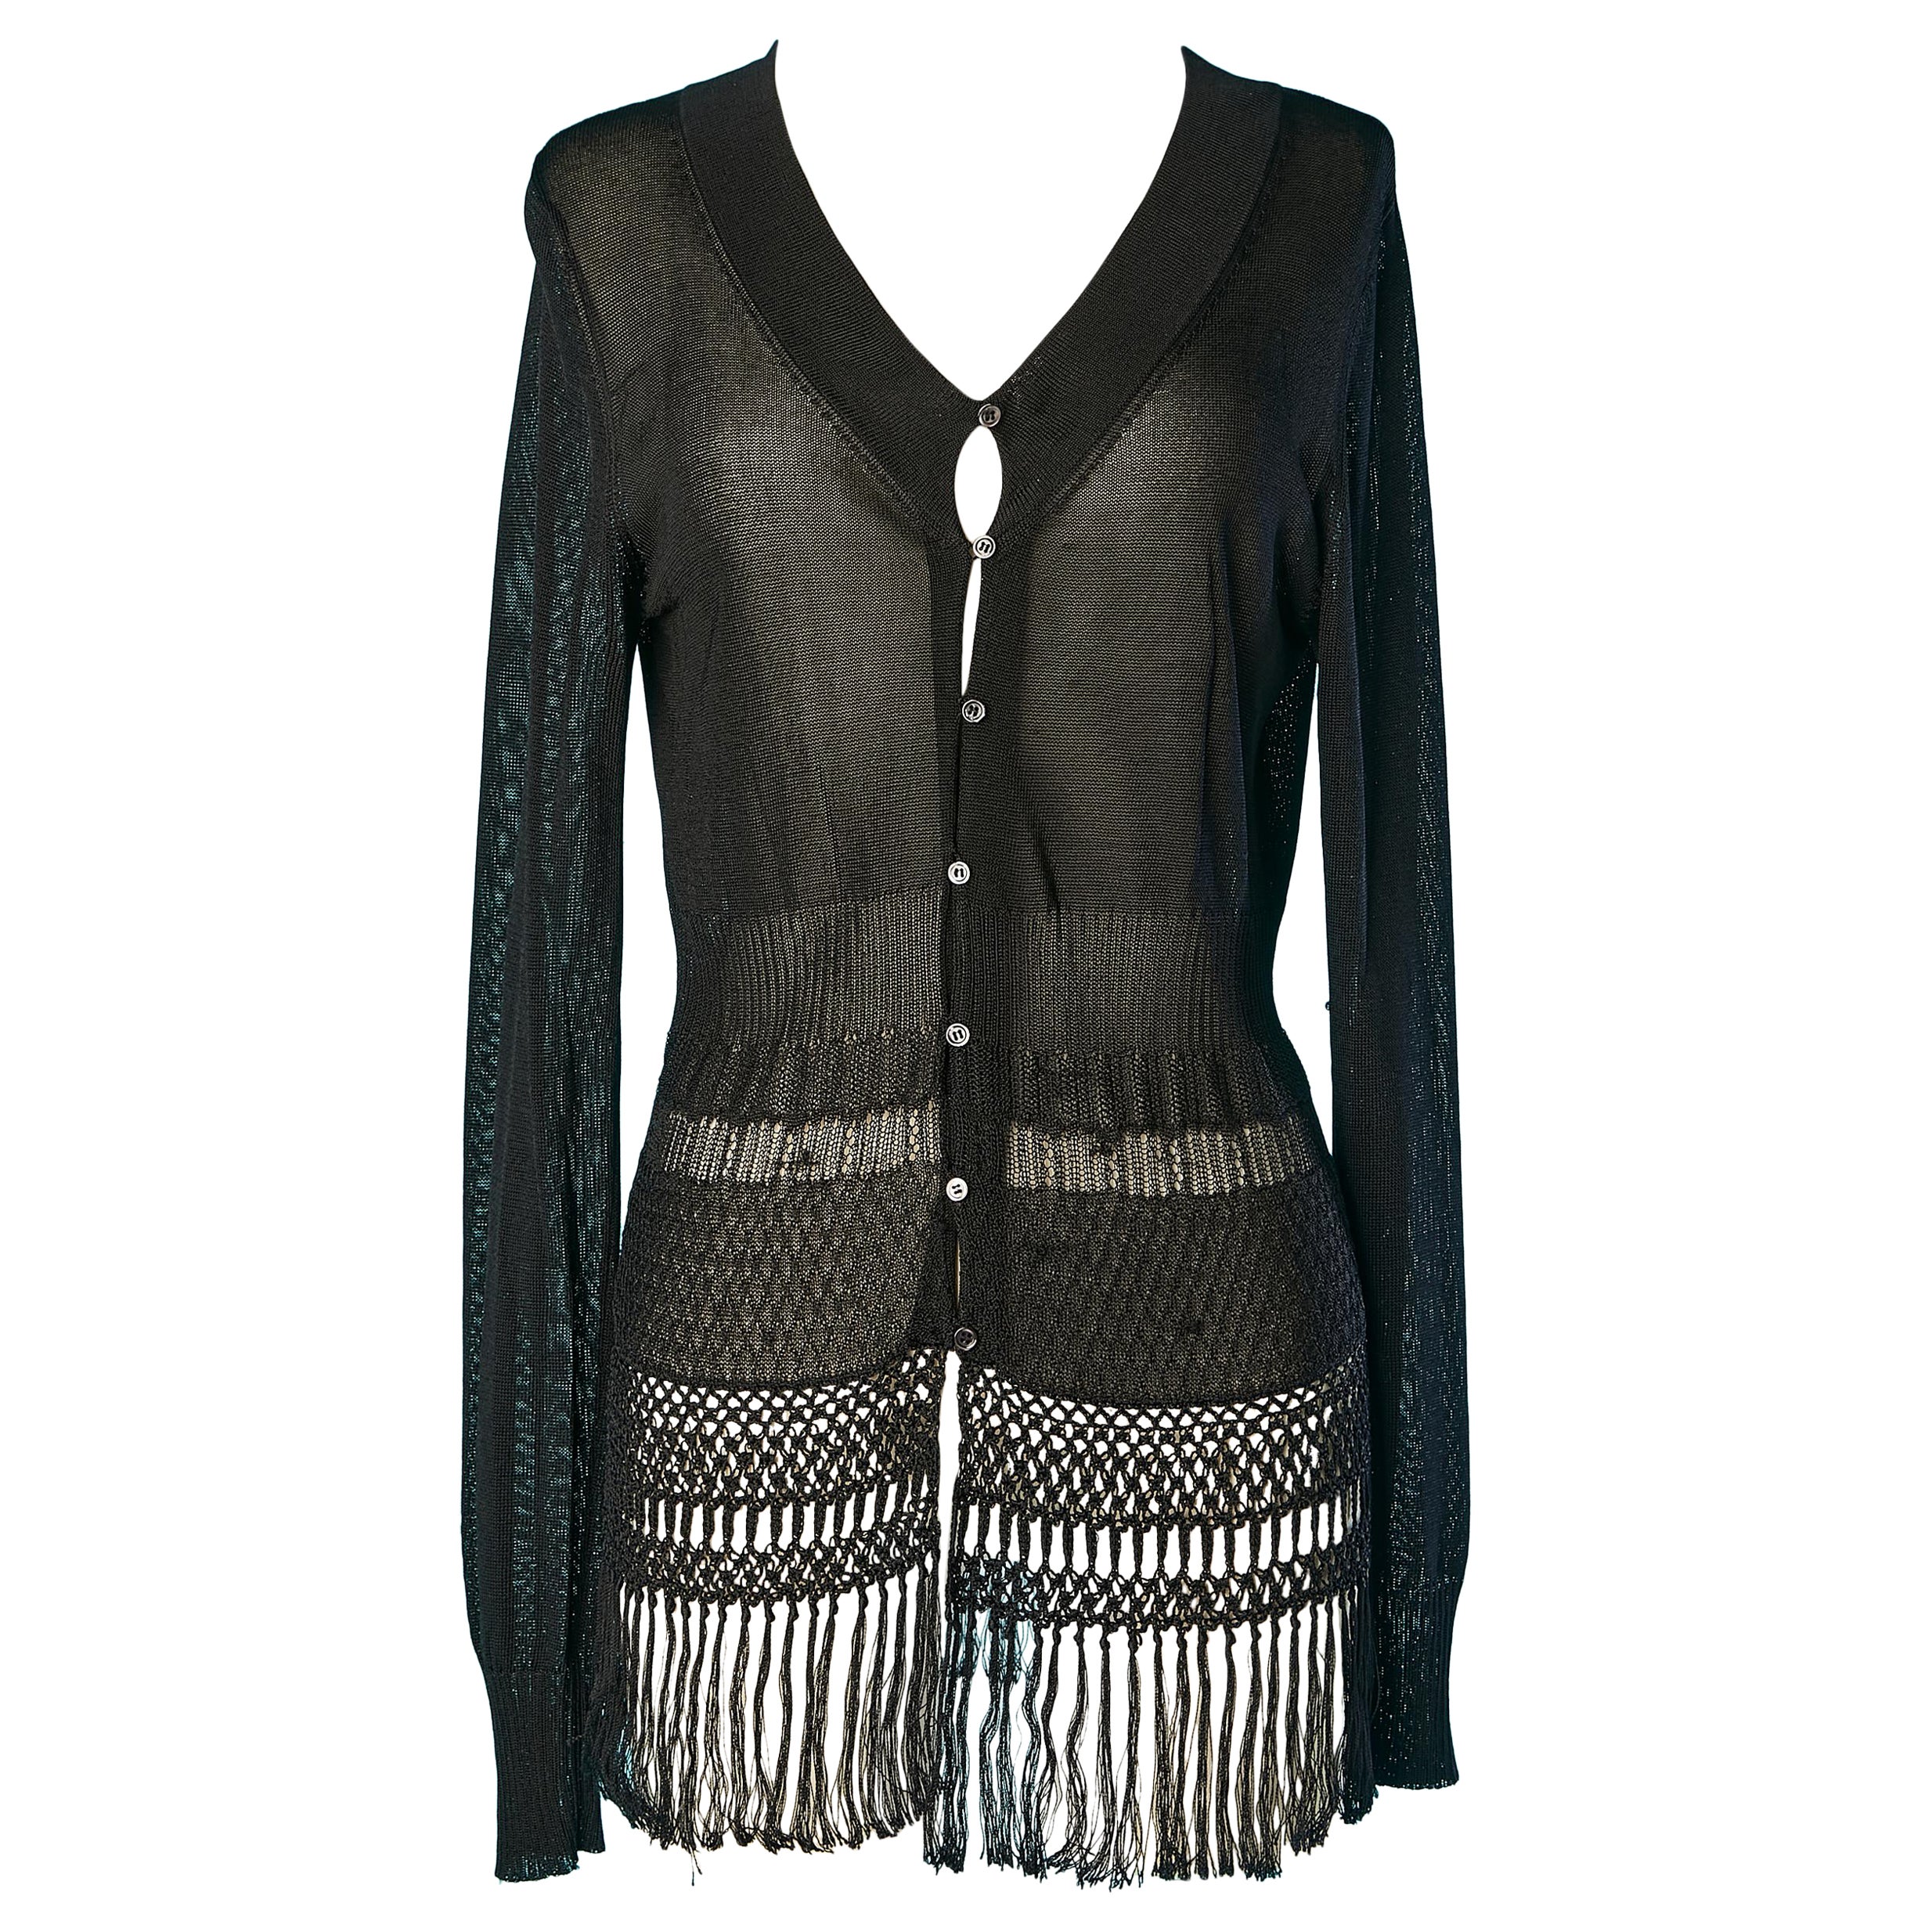 Black rayon cardigan ended with fringes Christian Lacroix Bazar 